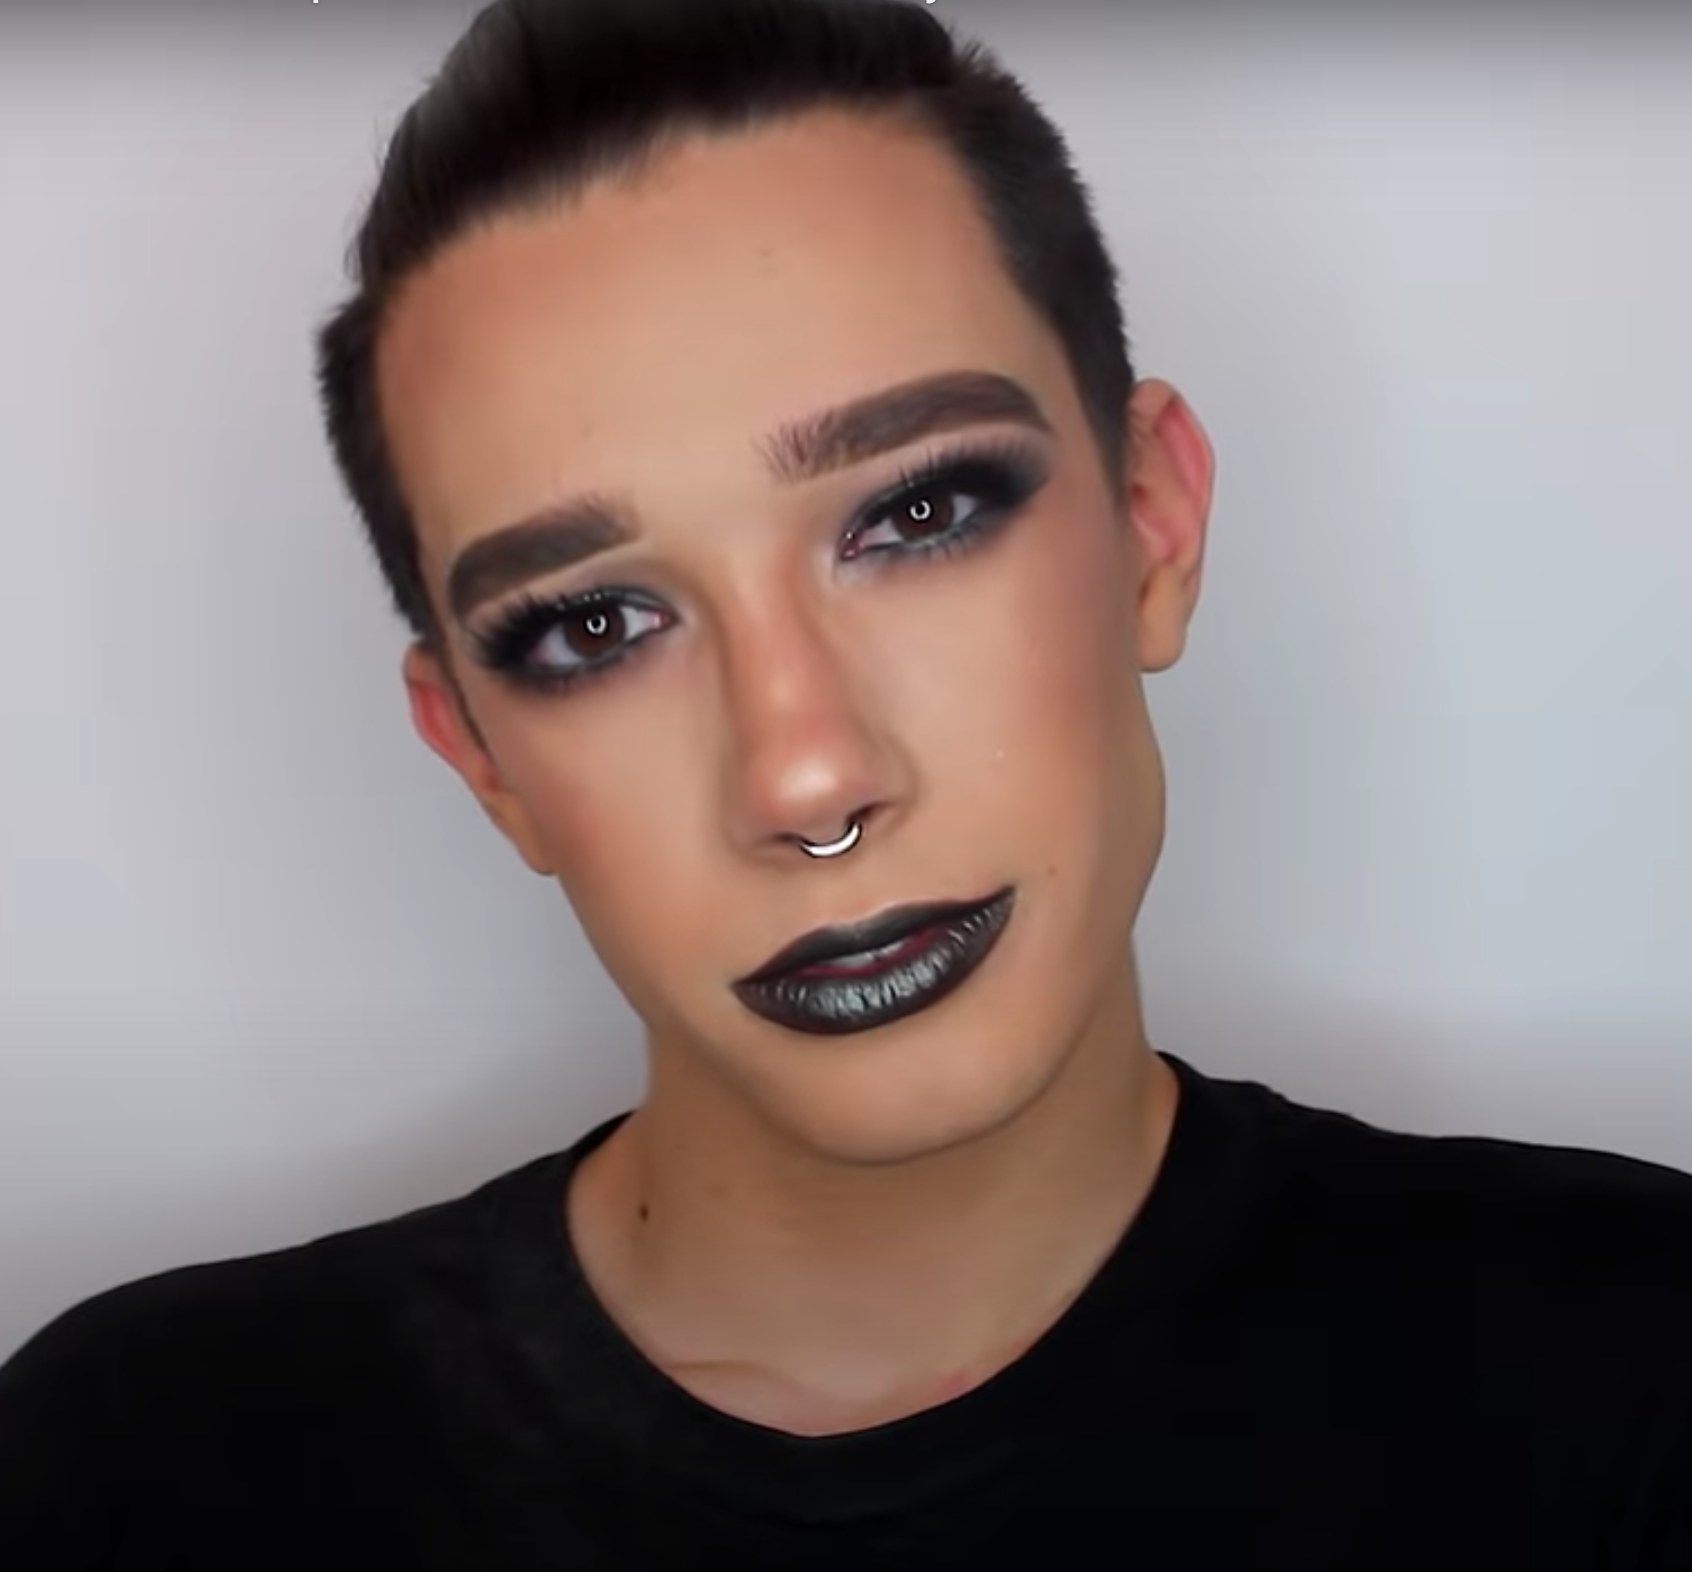 James Charles models makeup in his 2016 &quot;BLUE/BROWN SERPENT Makeup Tutorial&quot; YouTube video